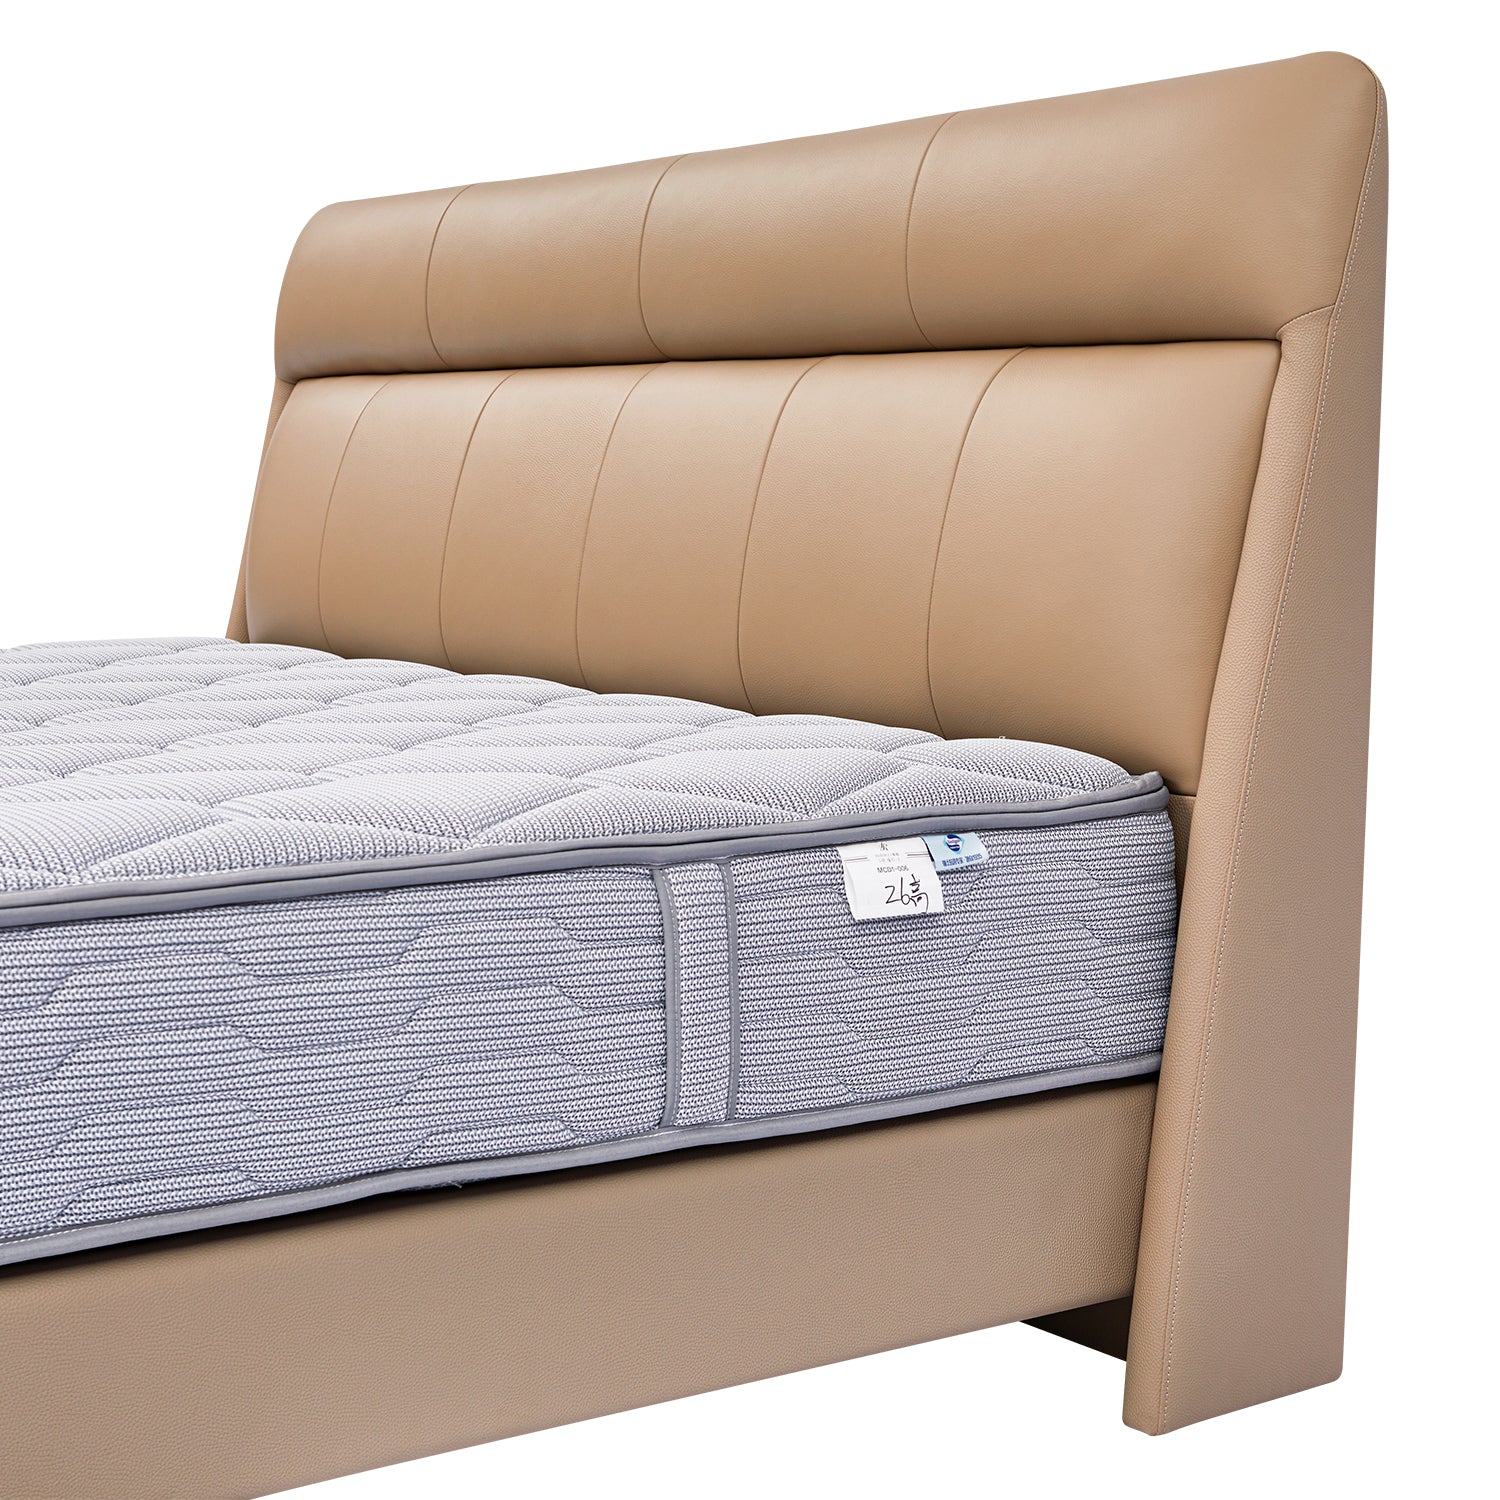 DeRUCCI bed frame BOC1 - 011 with beige leather upholstered headboard and light gray textured mattress cover